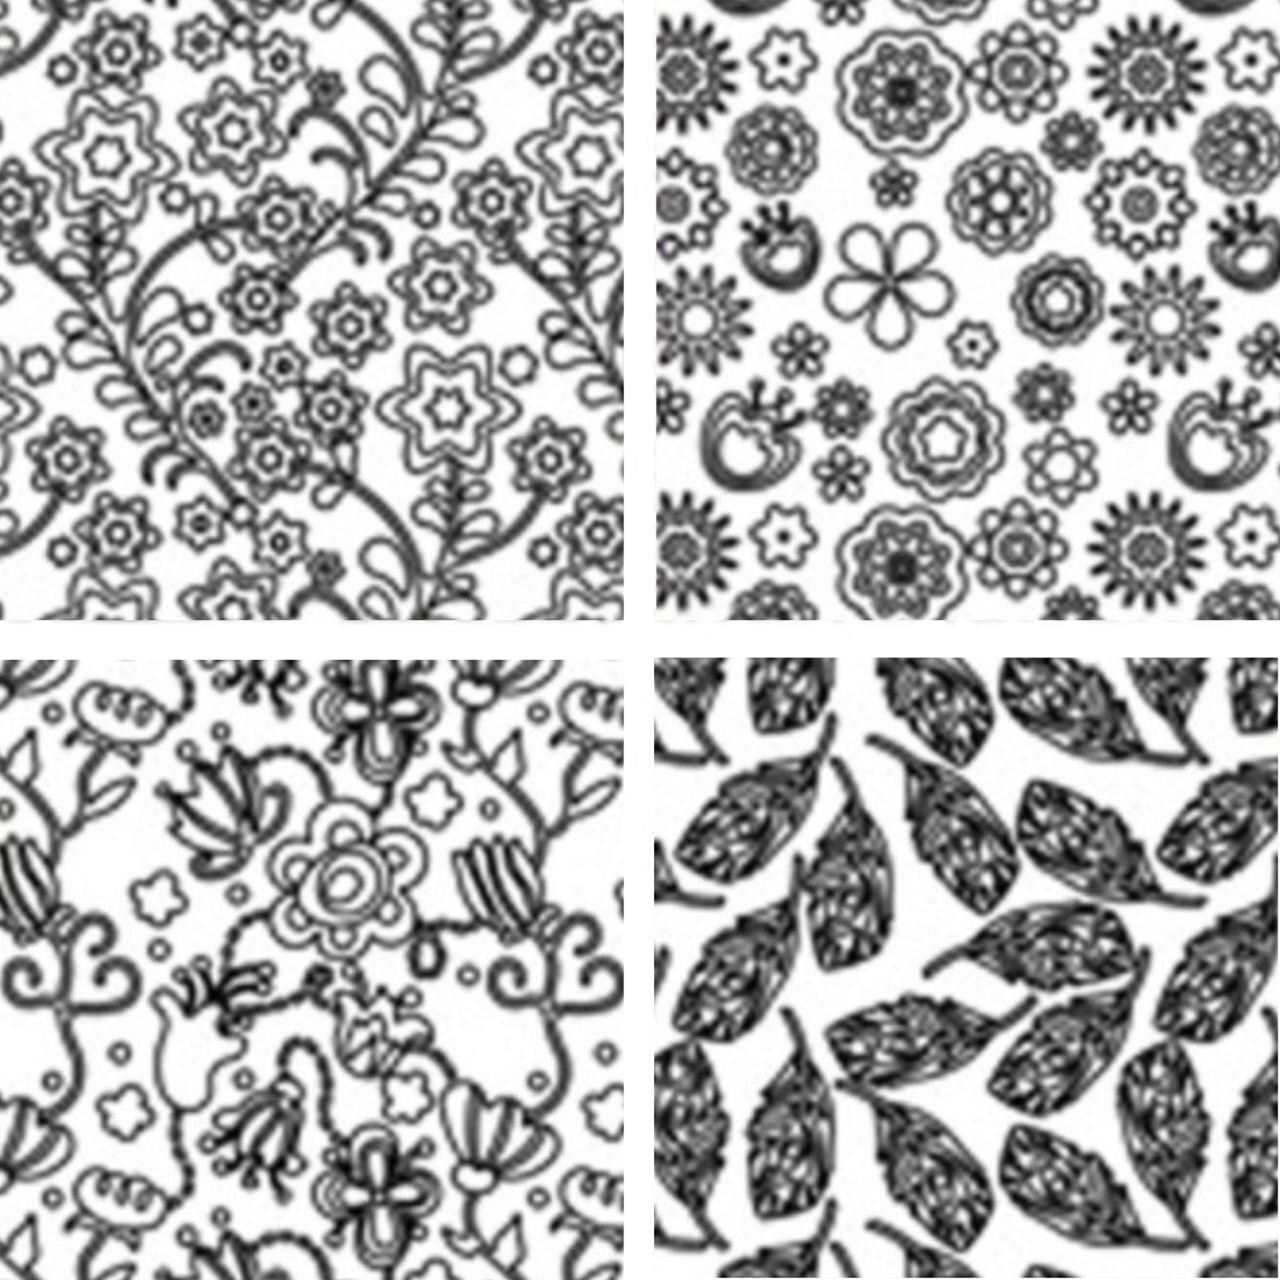 1 x Large Texture Sheet - Makins Floral 4 Pack